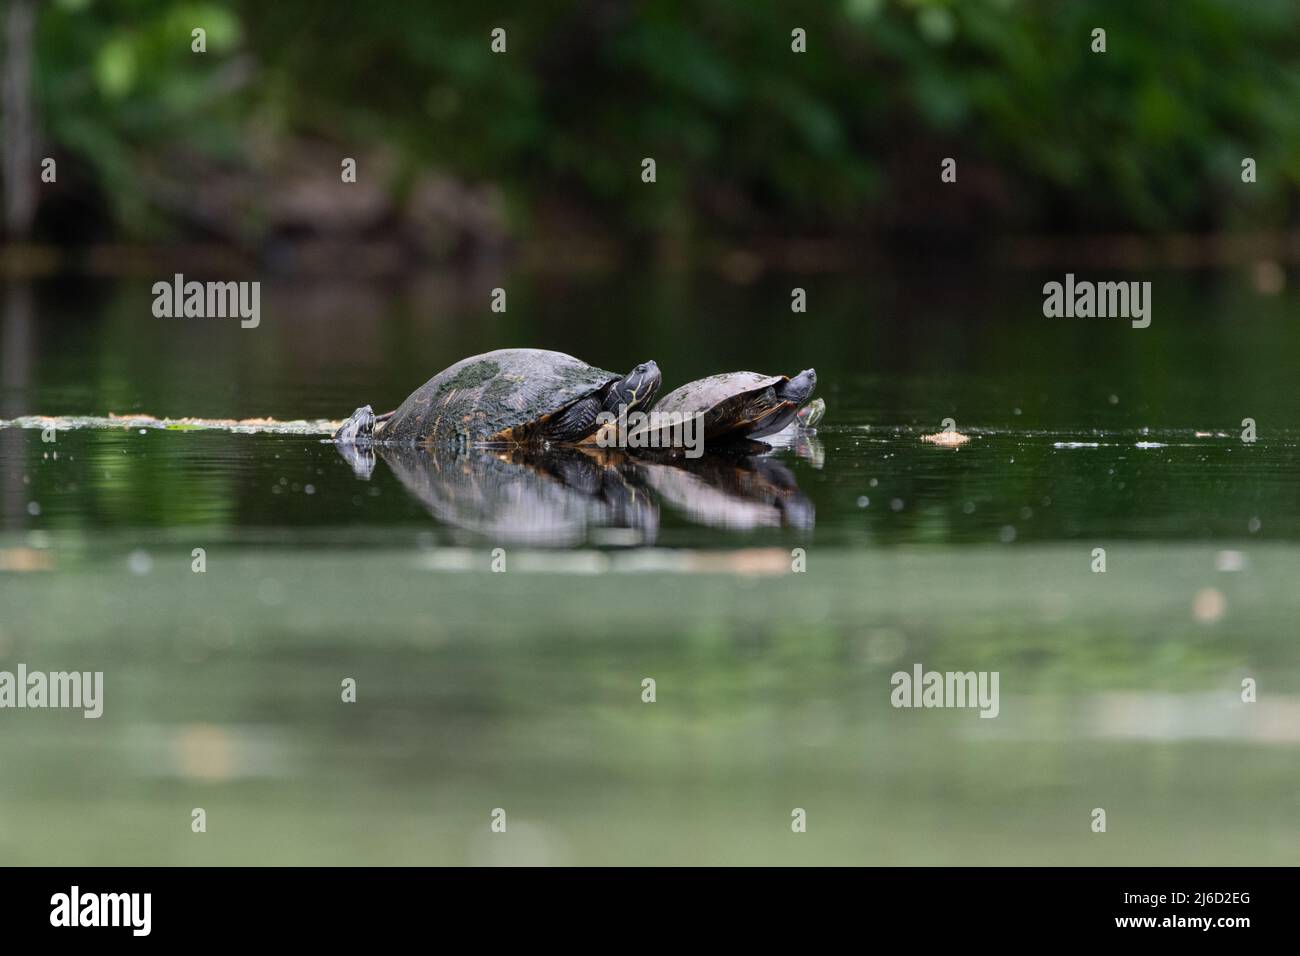 A group of Painted Turtles sunning on a stump submerged in the calm water of a pond with their reflections in the water that is green from the trees o Stock Photo